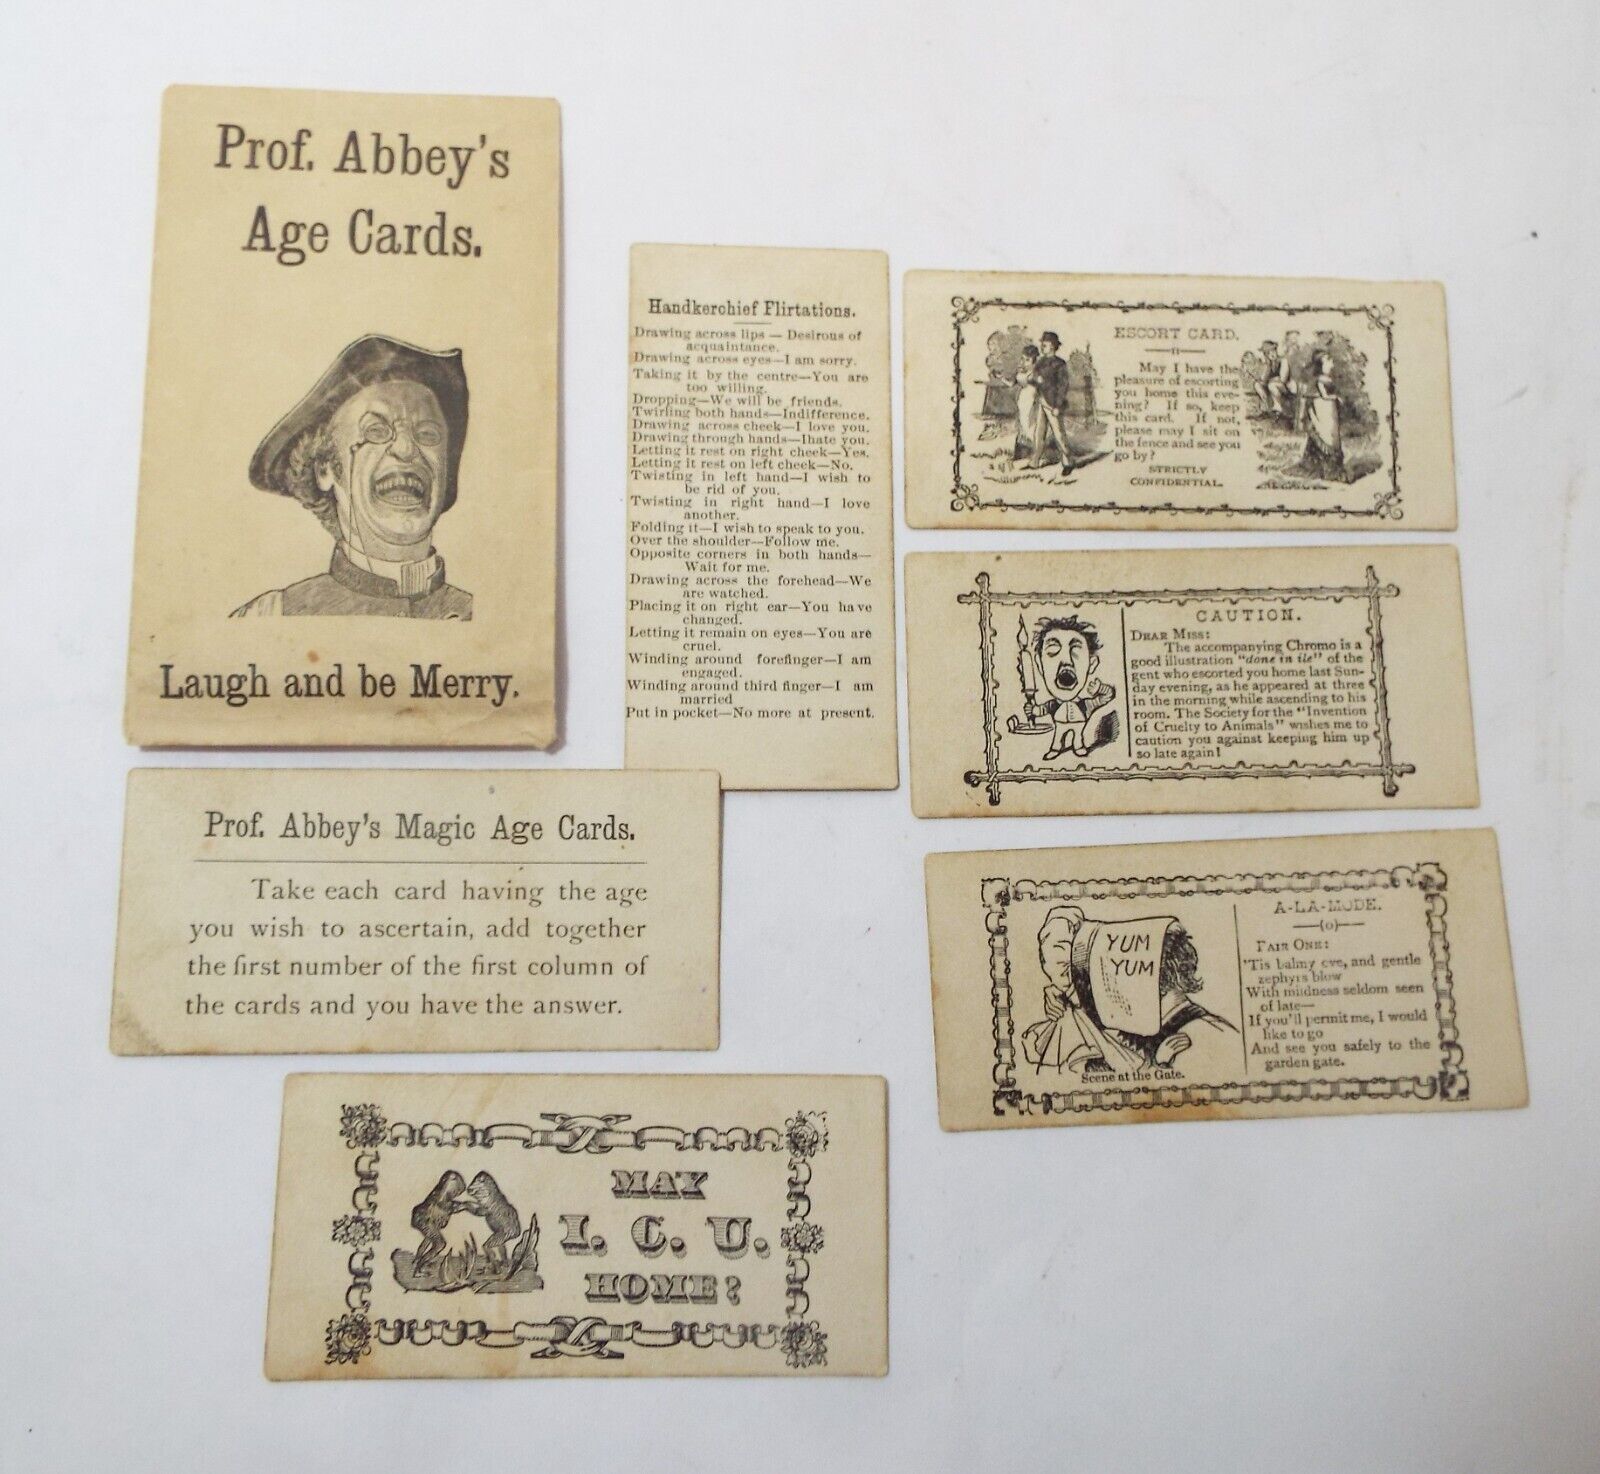 RARE Old Antique PROF. ABBEY'S AGE CARDS w/ Envelope MAGIC AGE CARDS Humor